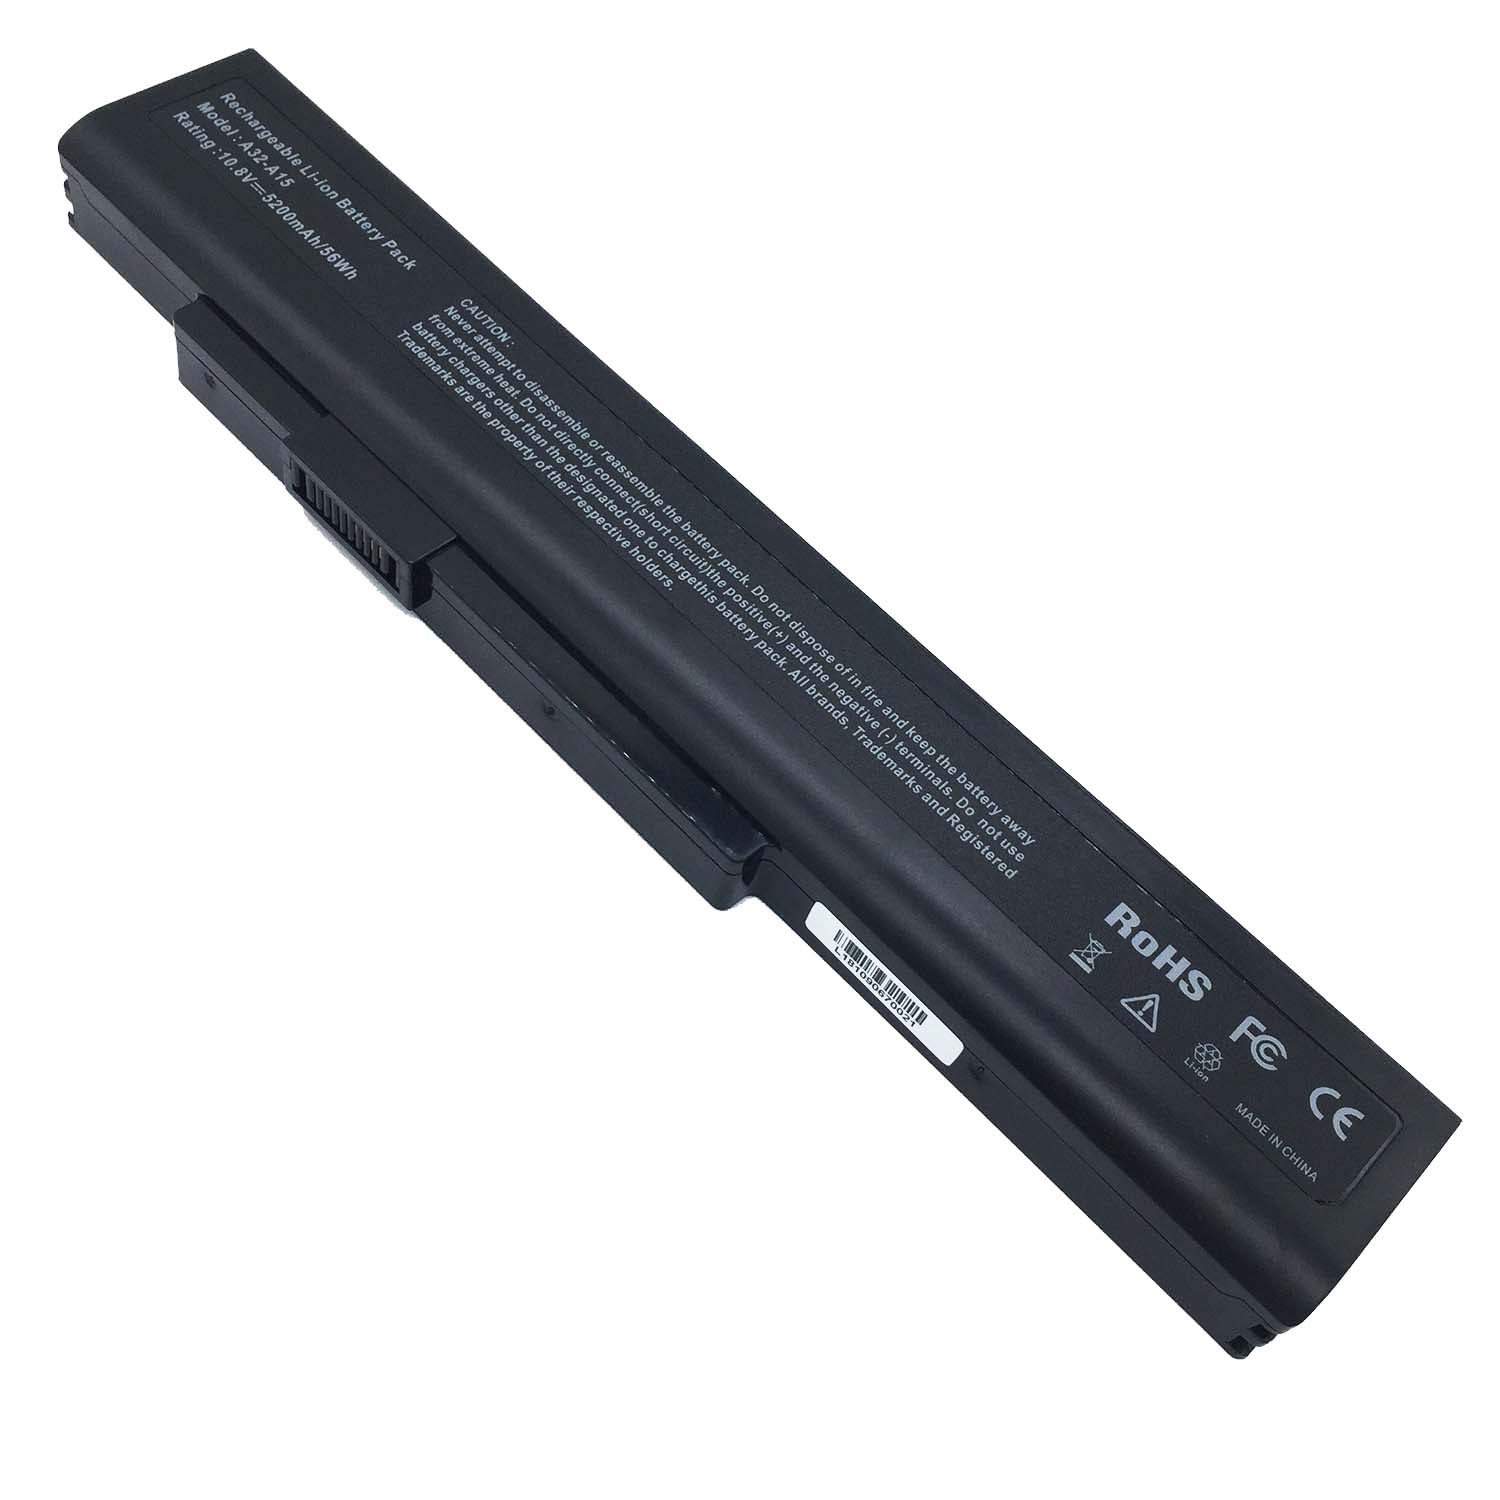 Replacement Battery for Medion Medion Akoya E7222 battery